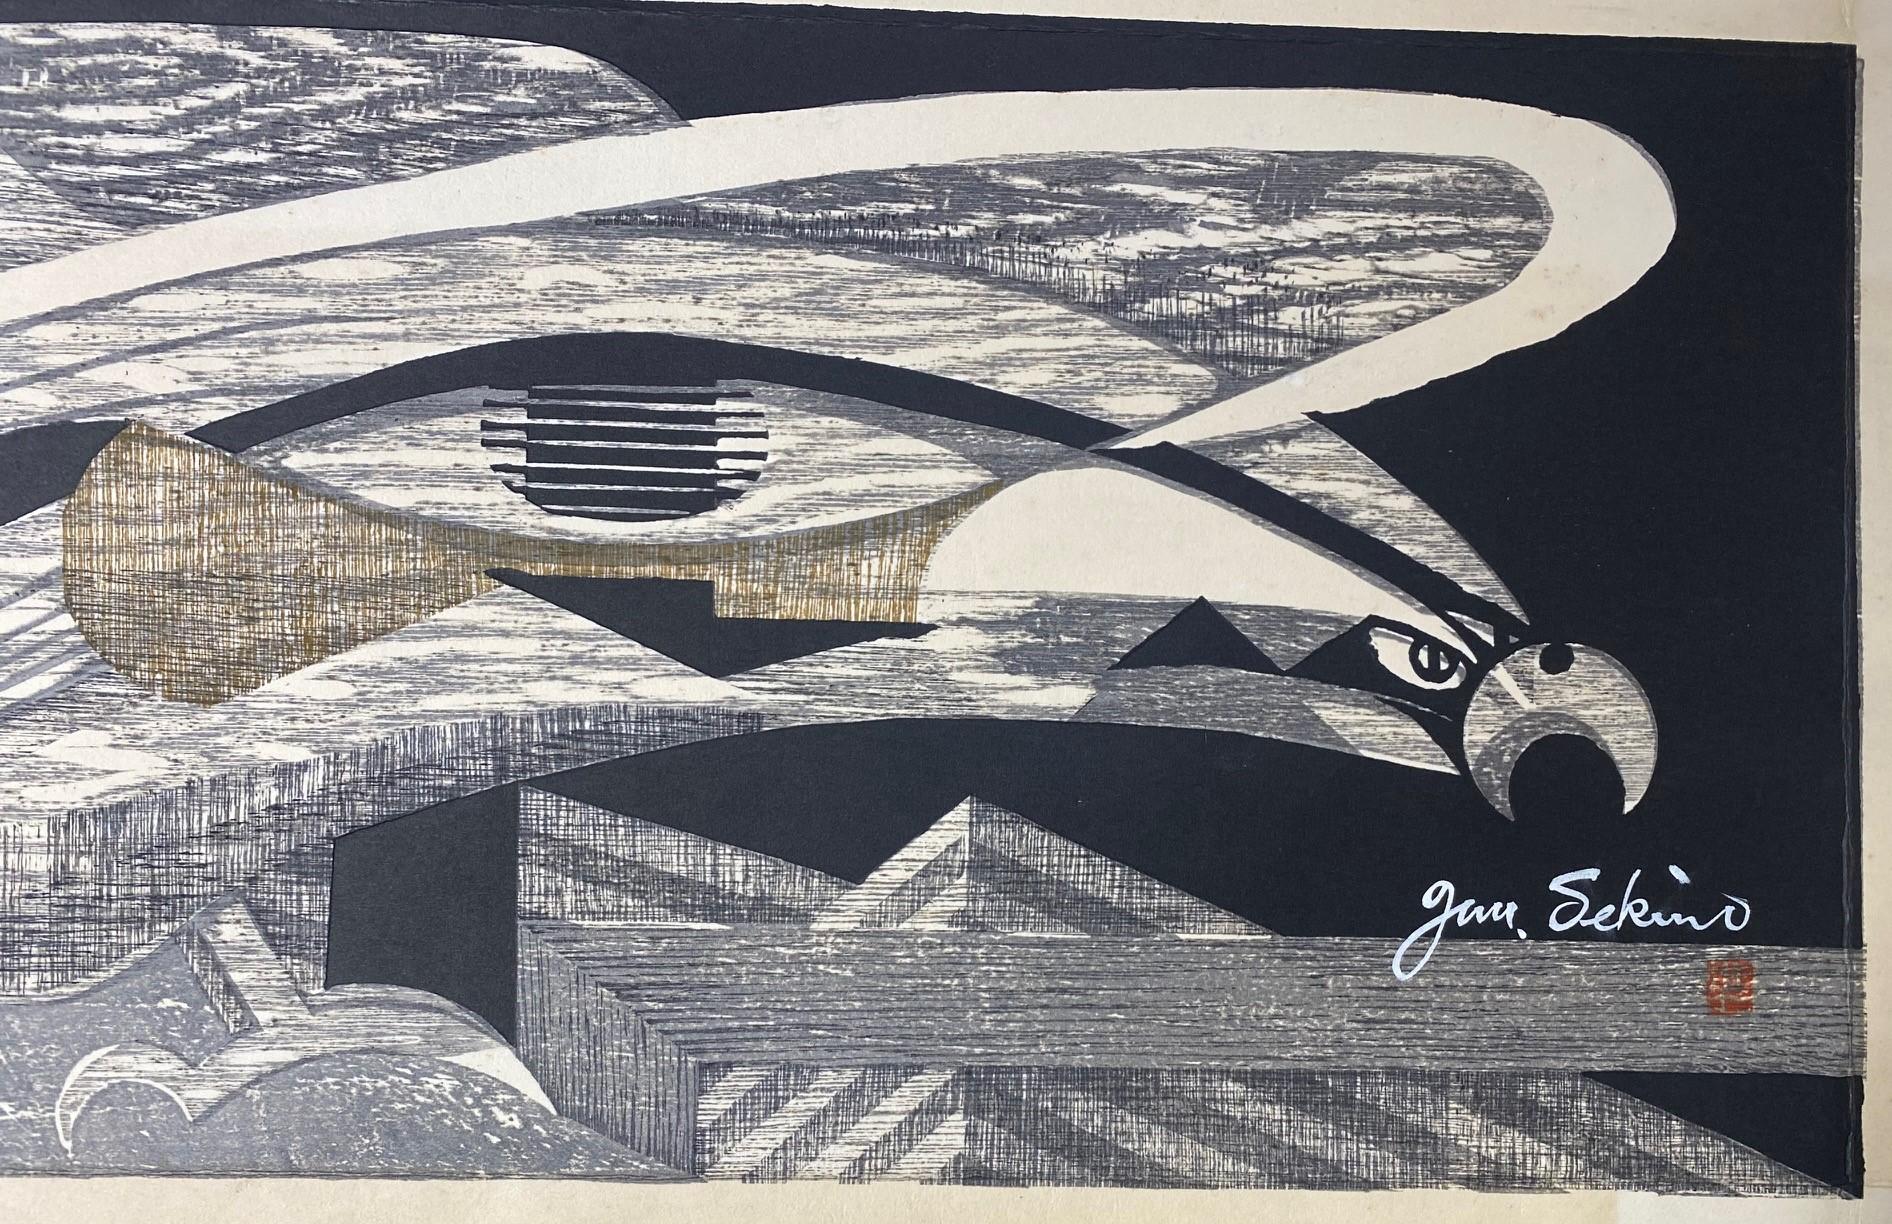 Junichiro Sekino Signed Limited Edition Japanese Woodblock Print of Eagle Hawk In Good Condition For Sale In Studio City, CA